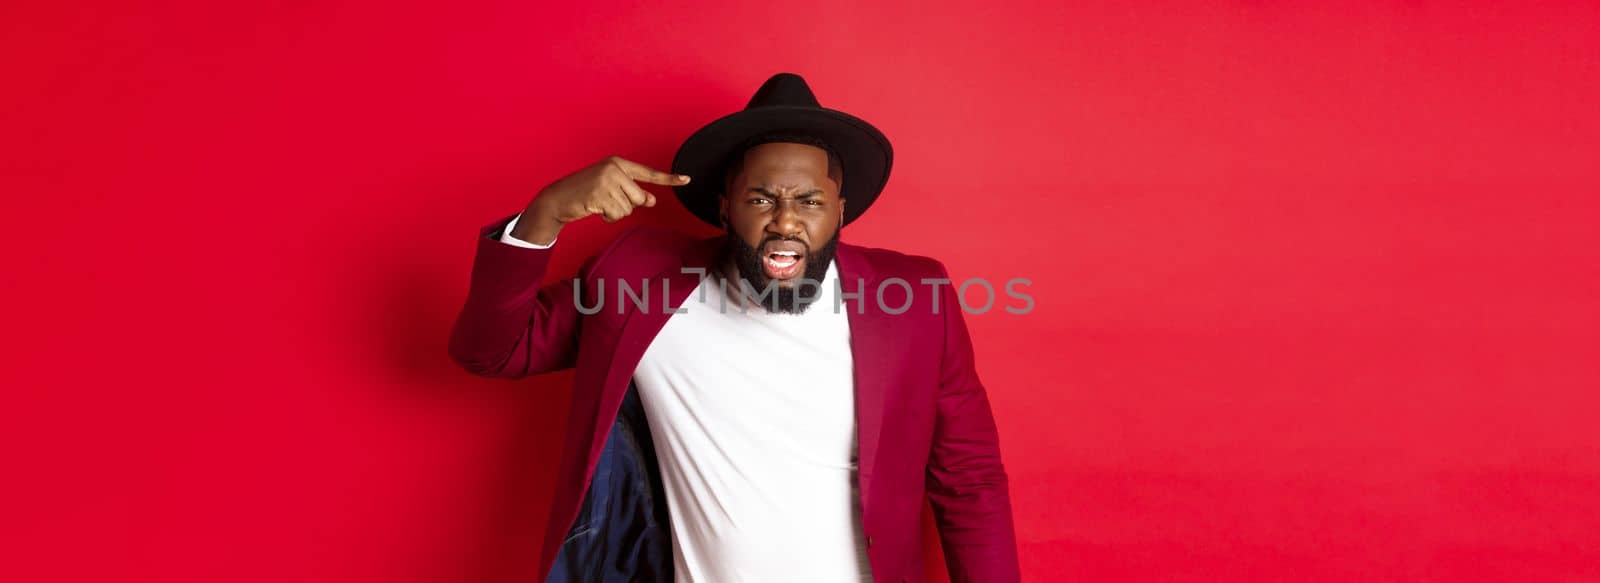 Angry Black man scolding person for being stupid, pointing at head and looking pissed-off, standing against red background by Benzoix